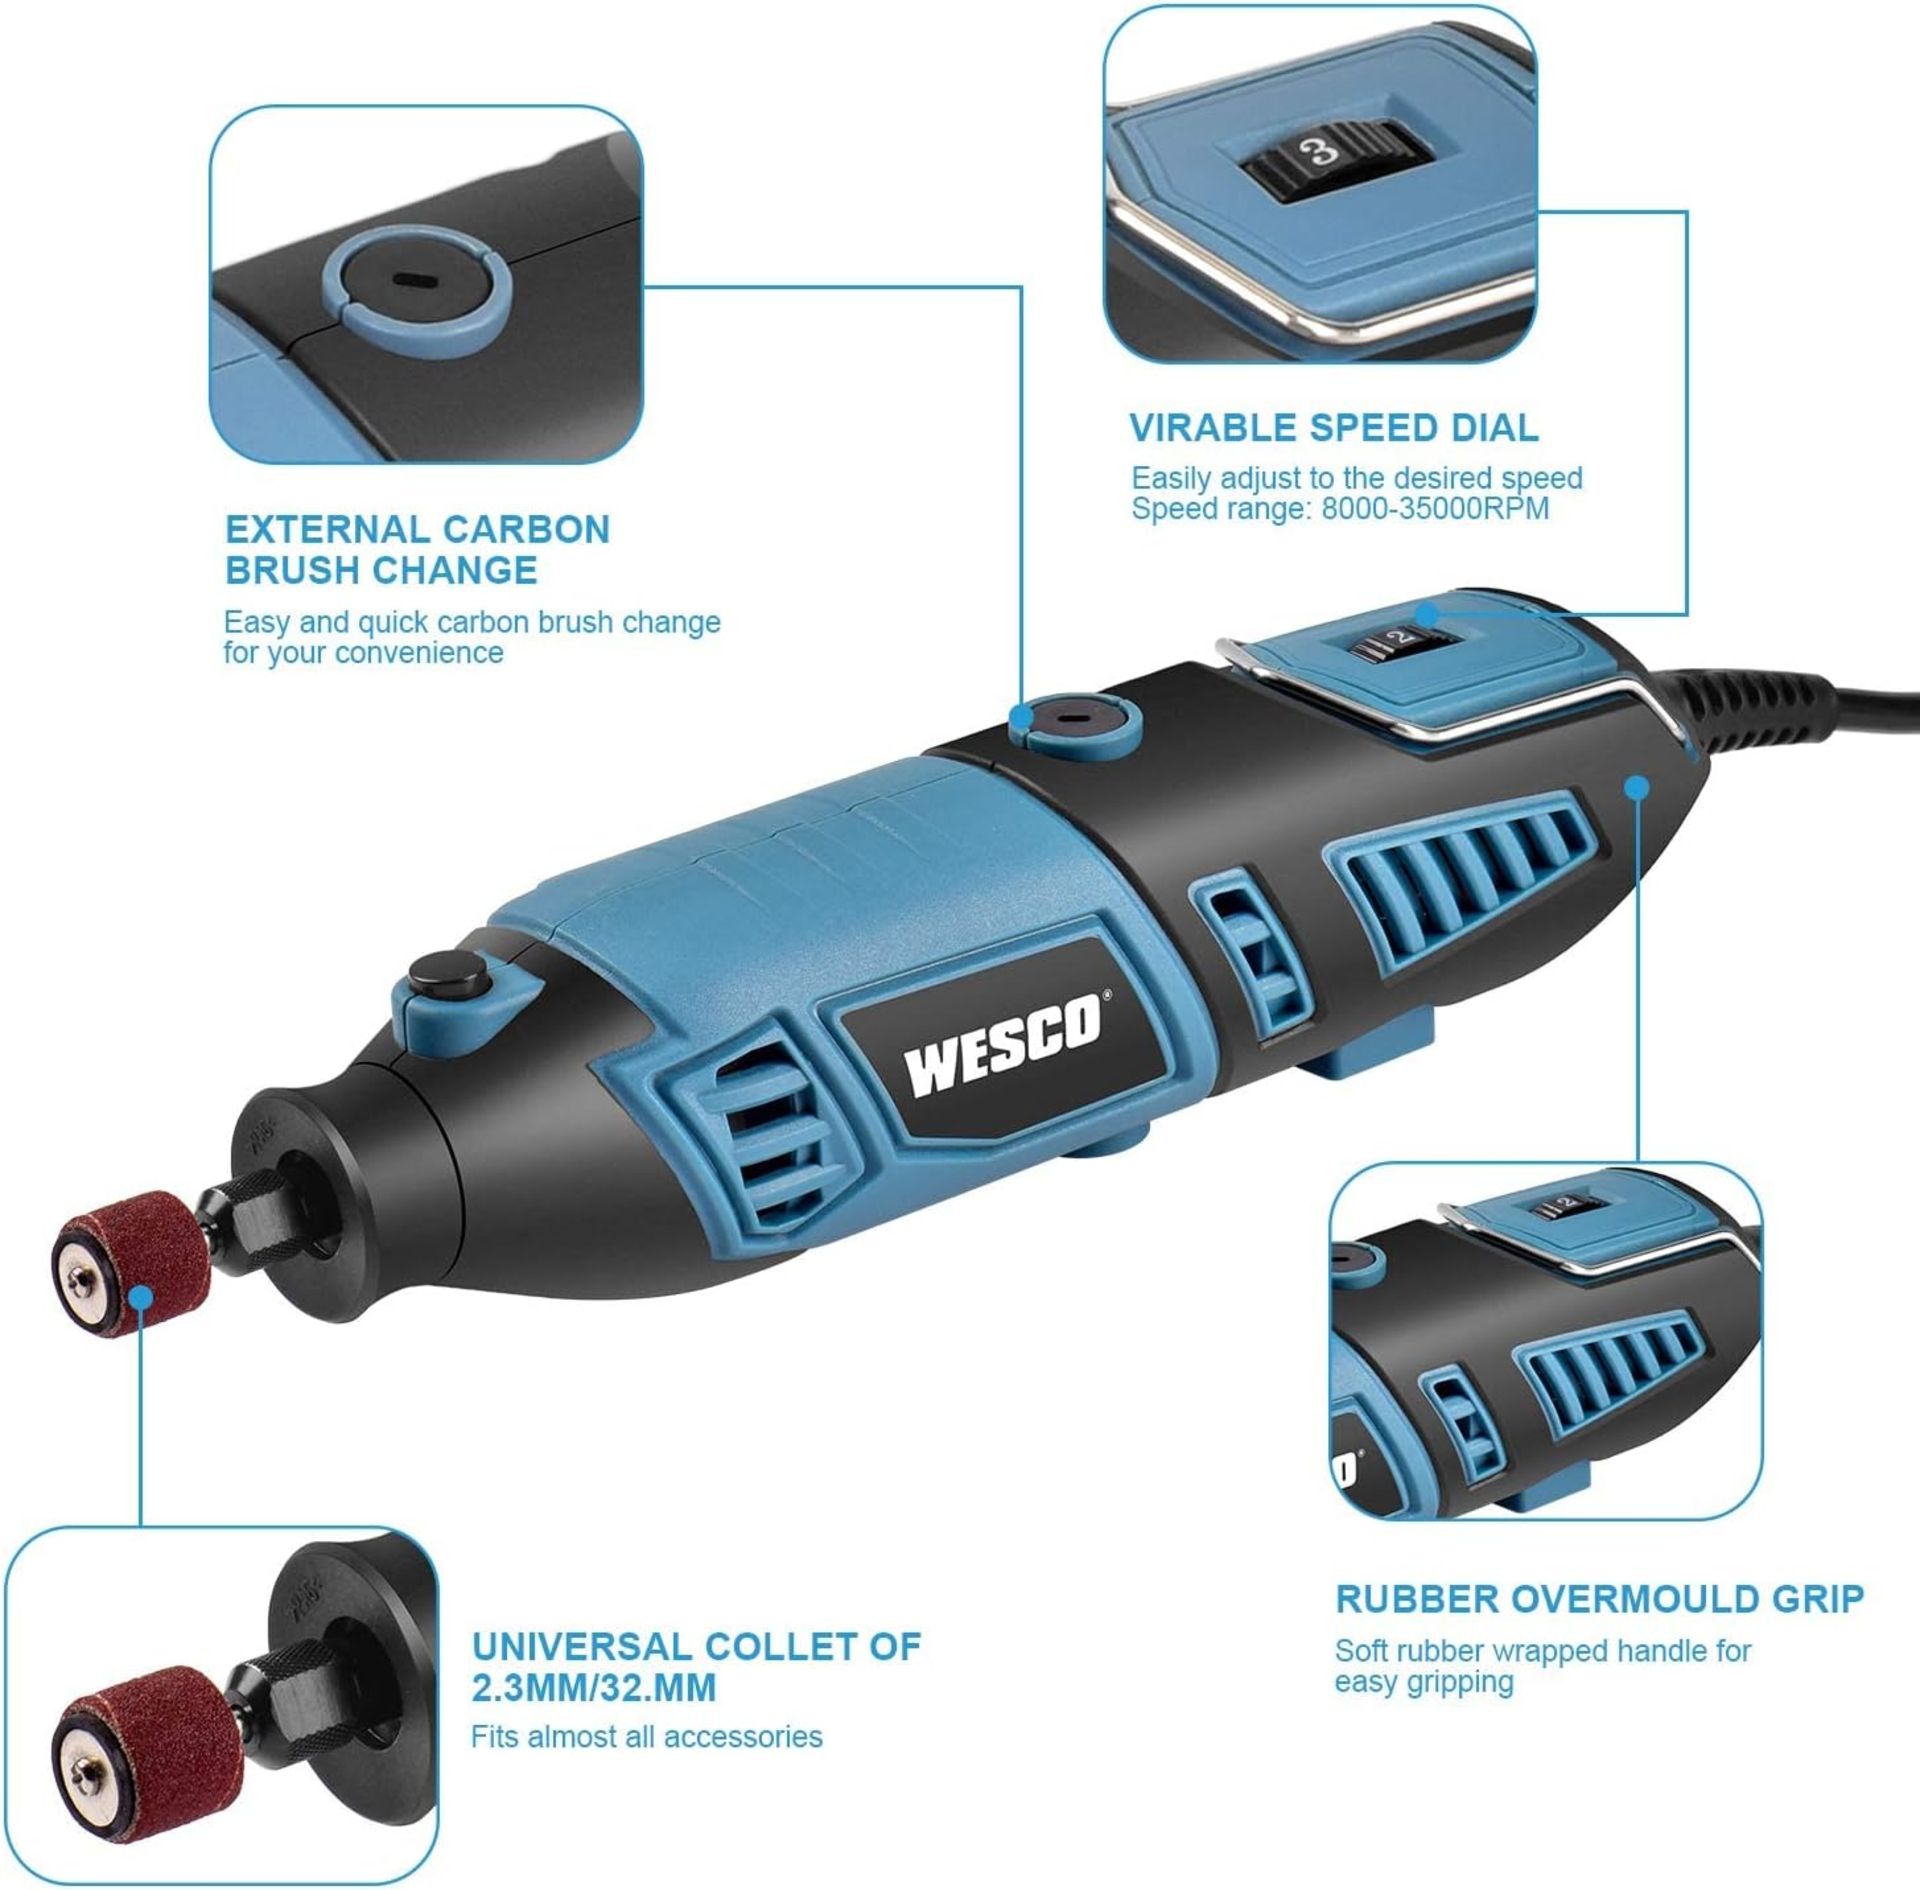 4x NEW & BOXED WESCO 160W Rotary Tool Mini Drill Kit with Flexible Shaft & Accessories. RRP £39.99 - Image 2 of 6